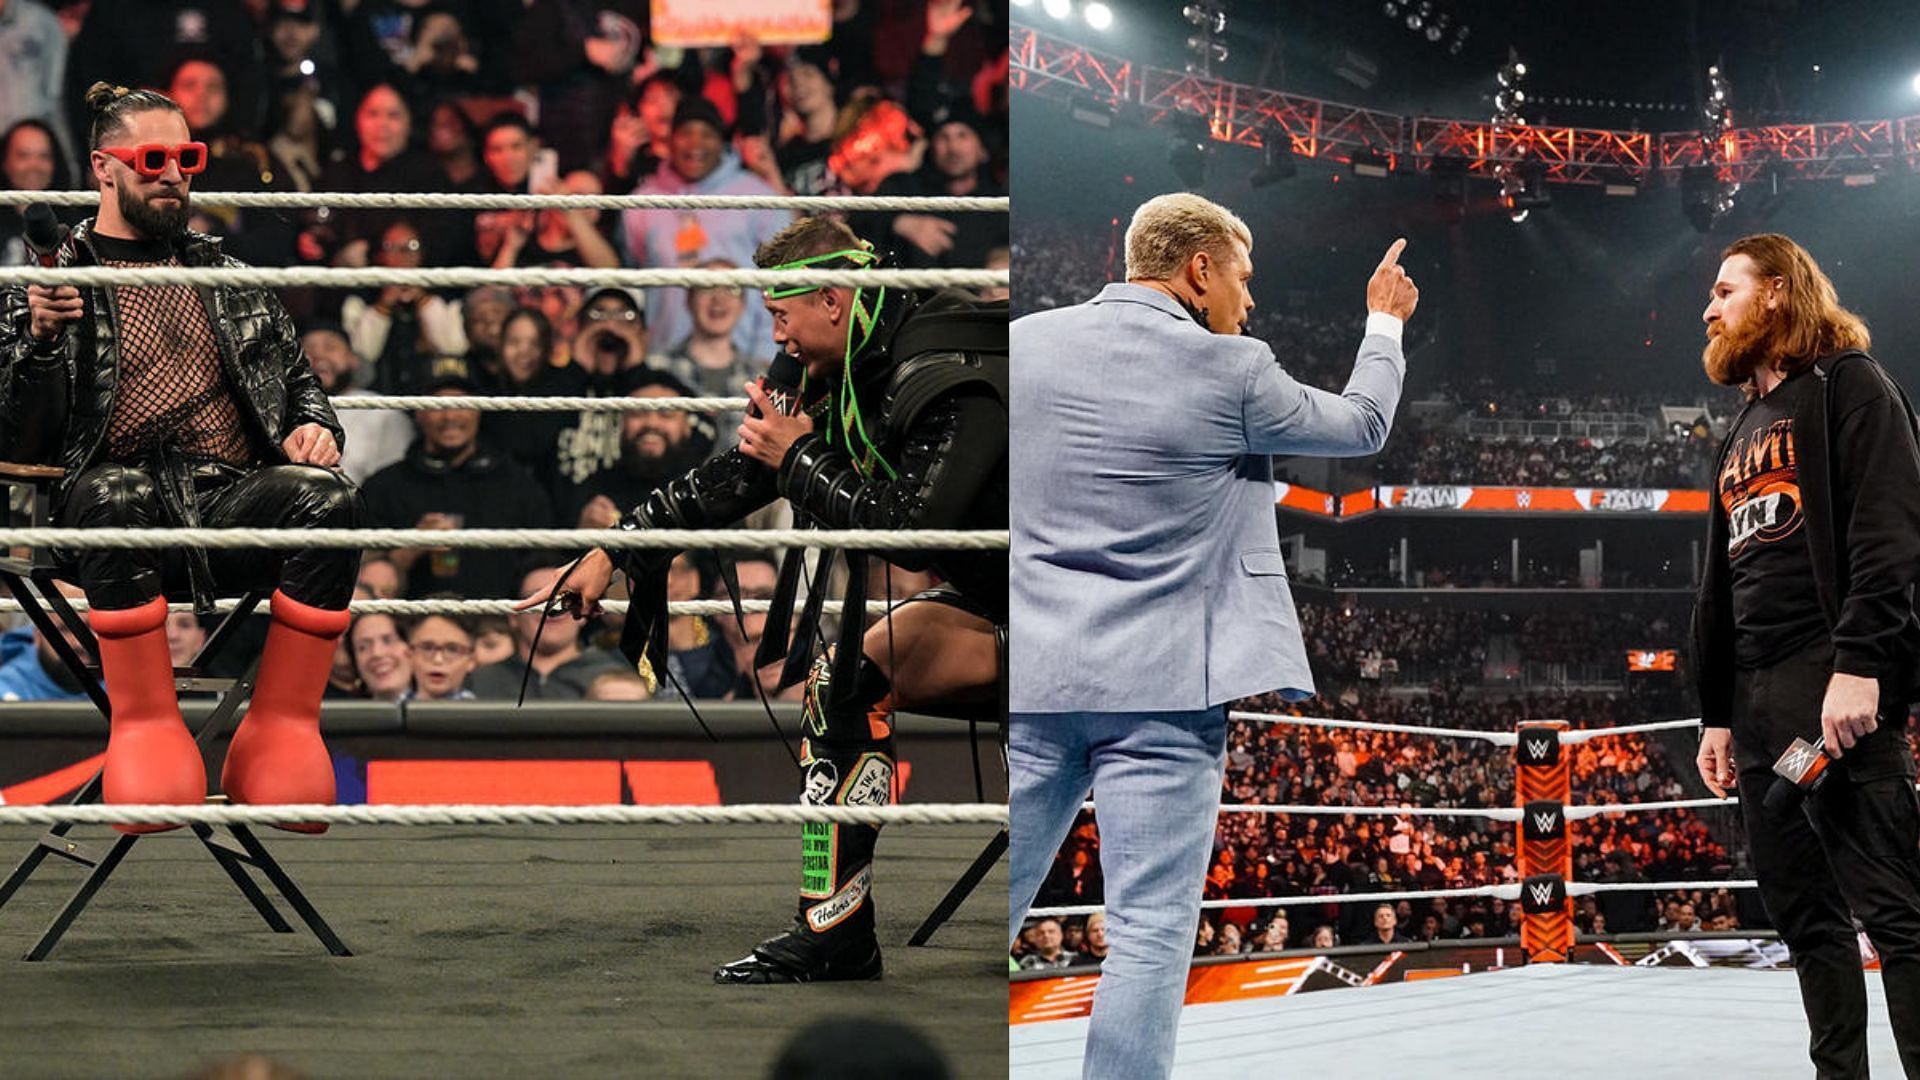 Brooklyn witnessed a memorable edition of WWE RAW